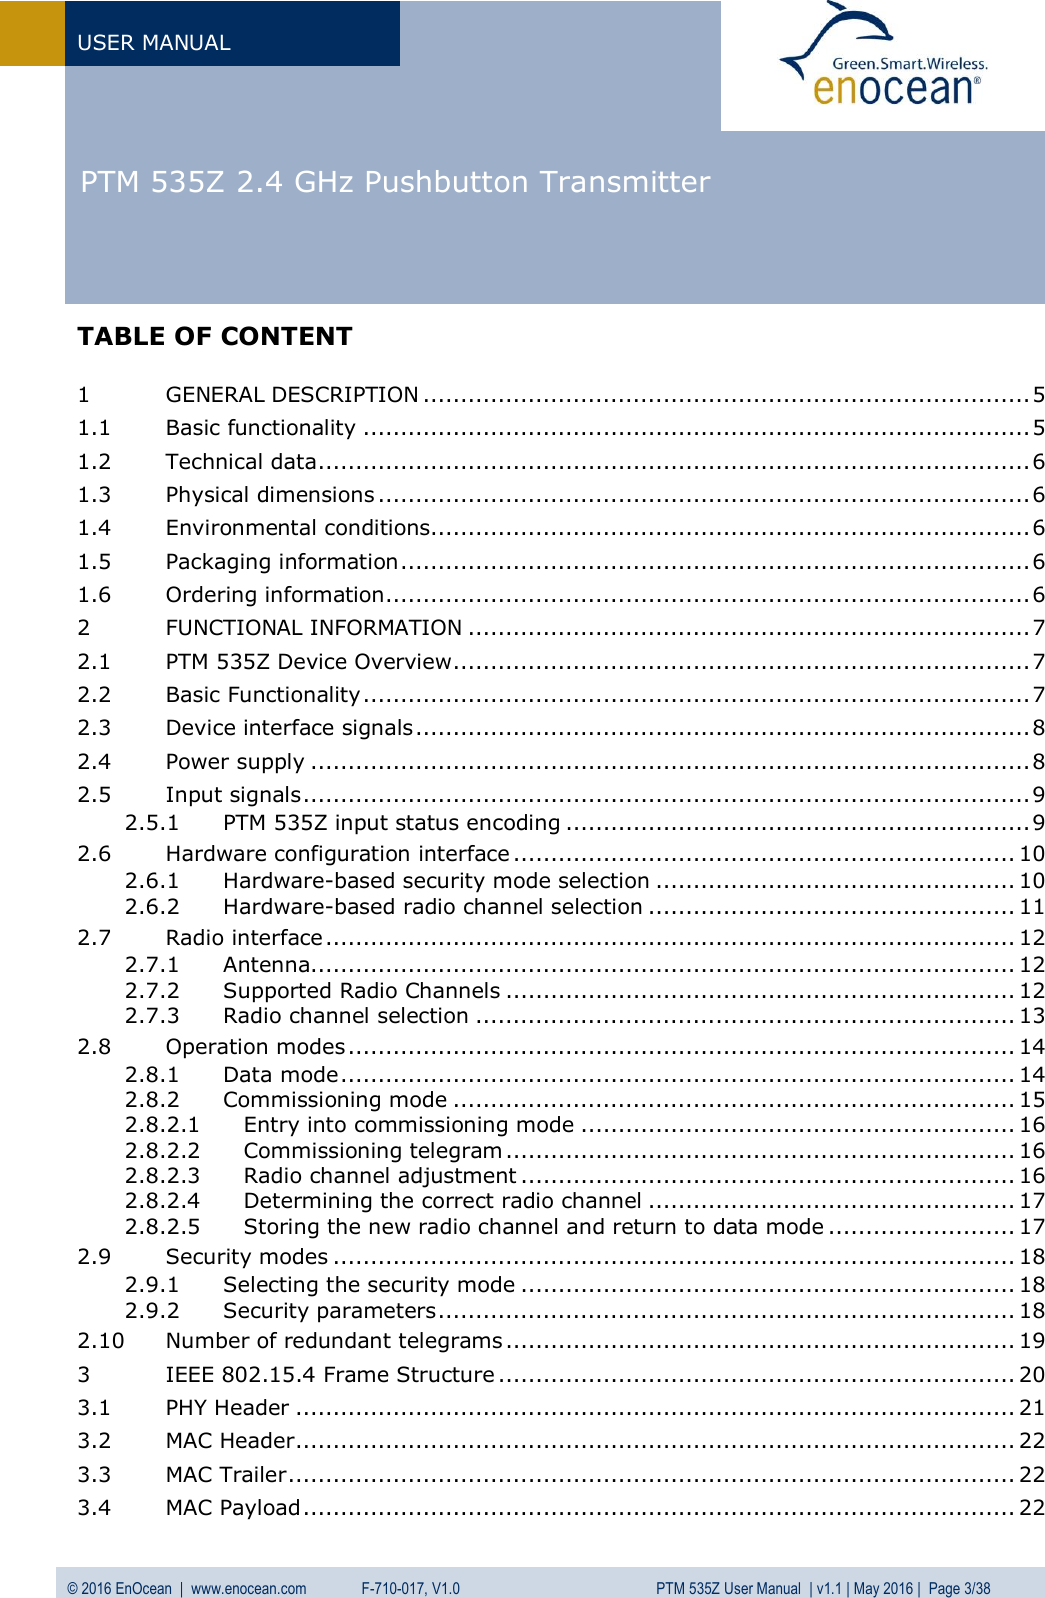   PTM 535Z 2.4 GHz Pushbutton Transmitter  USER MANUAL © 2016 EnOcean  |  www.enocean.com   F-710-017, V1.0          PTM 535Z User Manual  | v1.1 | May 2016 |  Page 3/38   TABLE OF CONTENT  1 GENERAL DESCRIPTION ................................................................................. 5 1.1 Basic functionality ......................................................................................... 5 1.2 Technical data ............................................................................................... 6 1.3 Physical dimensions ....................................................................................... 6 1.4 Environmental conditions................................................................................ 6 1.5 Packaging information .................................................................................... 6 1.6 Ordering information ...................................................................................... 6 2 FUNCTIONAL INFORMATION ........................................................................... 7 2.1 PTM 535Z Device Overview ............................................................................. 7 2.2 Basic Functionality ......................................................................................... 7 2.3 Device interface signals .................................................................................. 8 2.4 Power supply ................................................................................................ 8 2.5 Input signals ................................................................................................. 9 2.5.1 PTM 535Z input status encoding .............................................................. 9 2.6 Hardware configuration interface ................................................................... 10 2.6.1 Hardware-based security mode selection ................................................ 10 2.6.2 Hardware-based radio channel selection ................................................. 11 2.7 Radio interface ............................................................................................ 12 2.7.1 Antenna.............................................................................................. 12 2.7.2 Supported Radio Channels .................................................................... 12 2.7.3 Radio channel selection ........................................................................ 13 2.8 Operation modes ......................................................................................... 14 2.8.1 Data mode .......................................................................................... 14 2.8.2 Commissioning mode ........................................................................... 15 2.8.2.1 Entry into commissioning mode .......................................................... 16 2.8.2.2 Commissioning telegram .................................................................... 16 2.8.2.3 Radio channel adjustment .................................................................. 16 2.8.2.4 Determining the correct radio channel ................................................. 17 2.8.2.5 Storing the new radio channel and return to data mode ......................... 17 2.9 Security modes ........................................................................................... 18 2.9.1 Selecting the security mode .................................................................. 18 2.9.2 Security parameters ............................................................................. 18 2.10 Number of redundant telegrams .................................................................... 19 3 IEEE 802.15.4 Frame Structure ..................................................................... 20 3.1 PHY Header ................................................................................................ 21 3.2 MAC Header ................................................................................................ 22 3.3 MAC Trailer ................................................................................................. 22 3.4 MAC Payload ............................................................................................... 22 